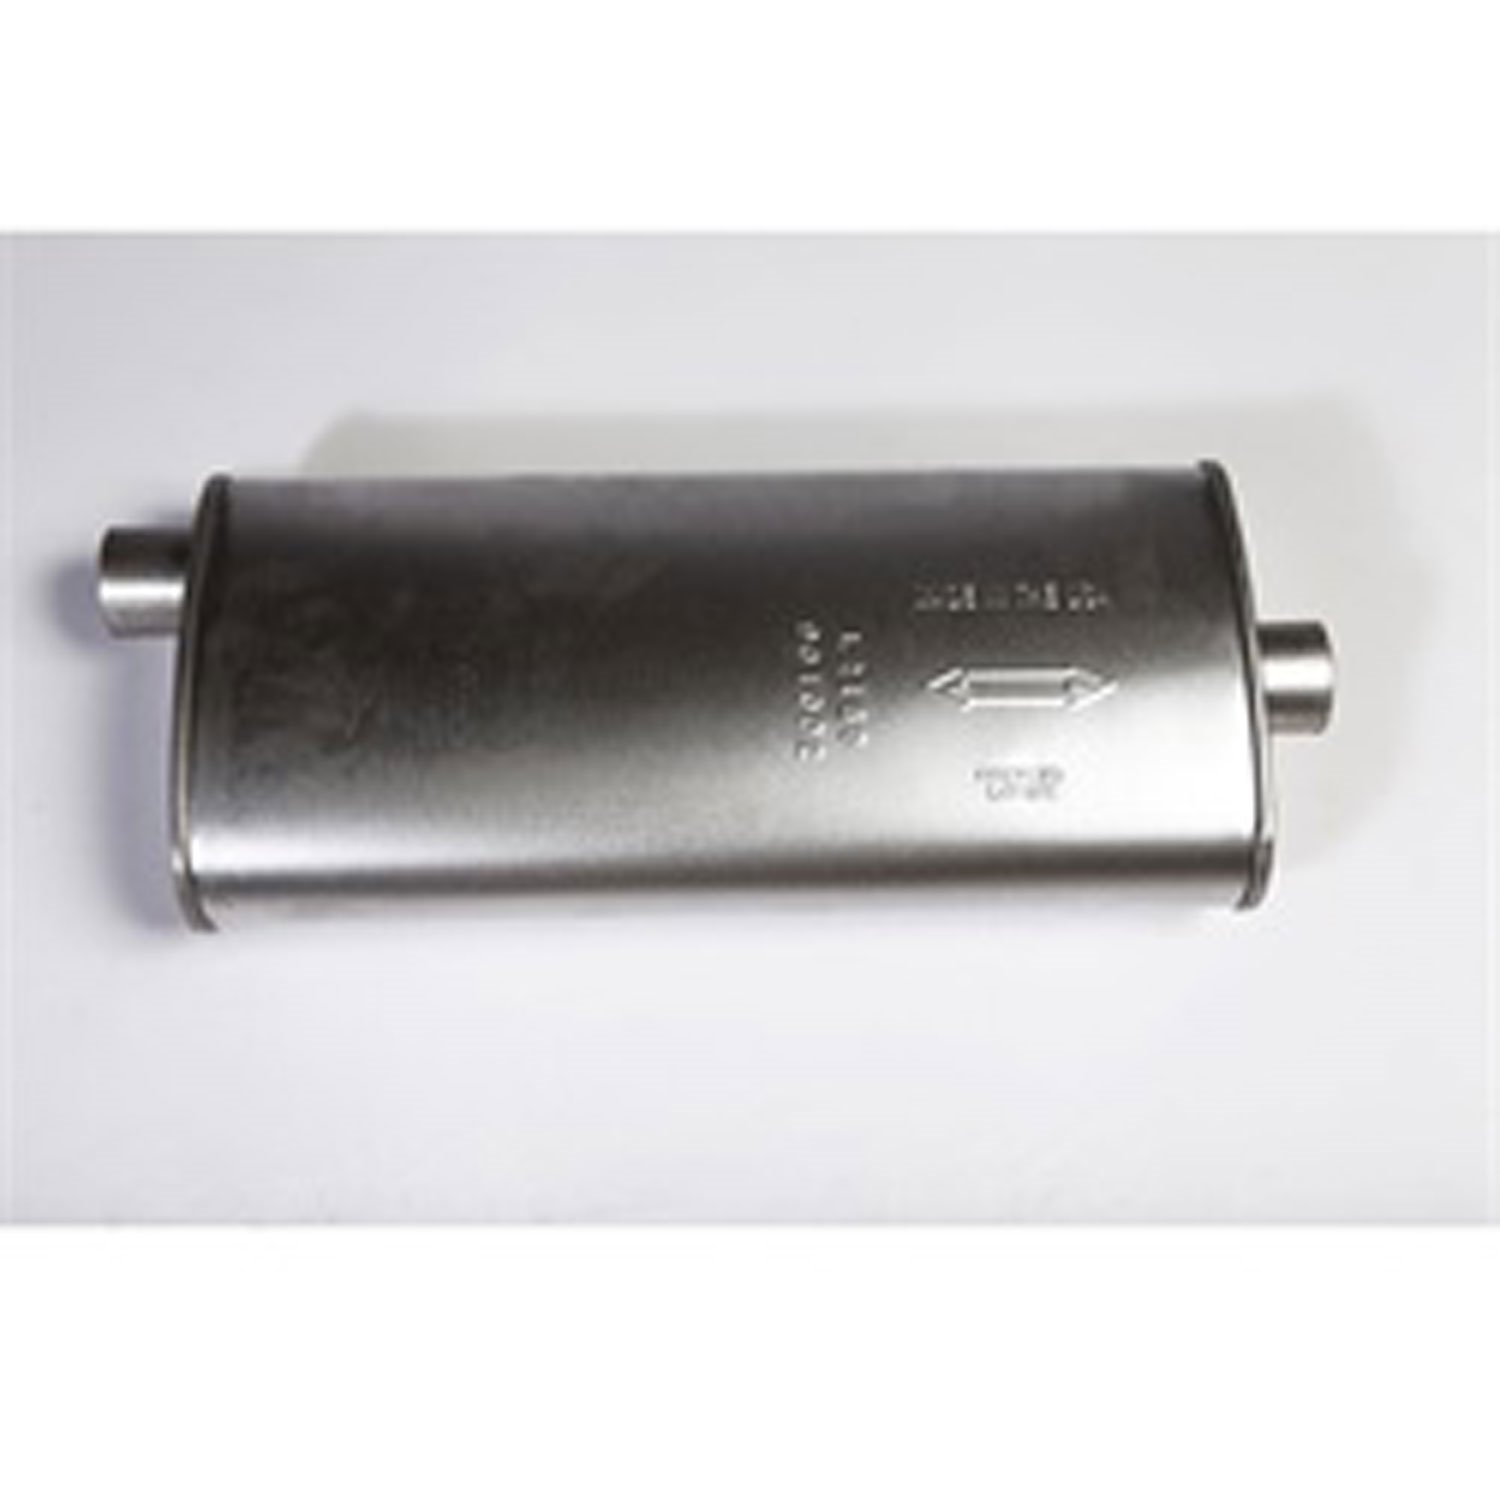 Replacement muffler from Omix-ADA, Fits 96-98 Jeep Cherokees with a 4.0 liter engine.